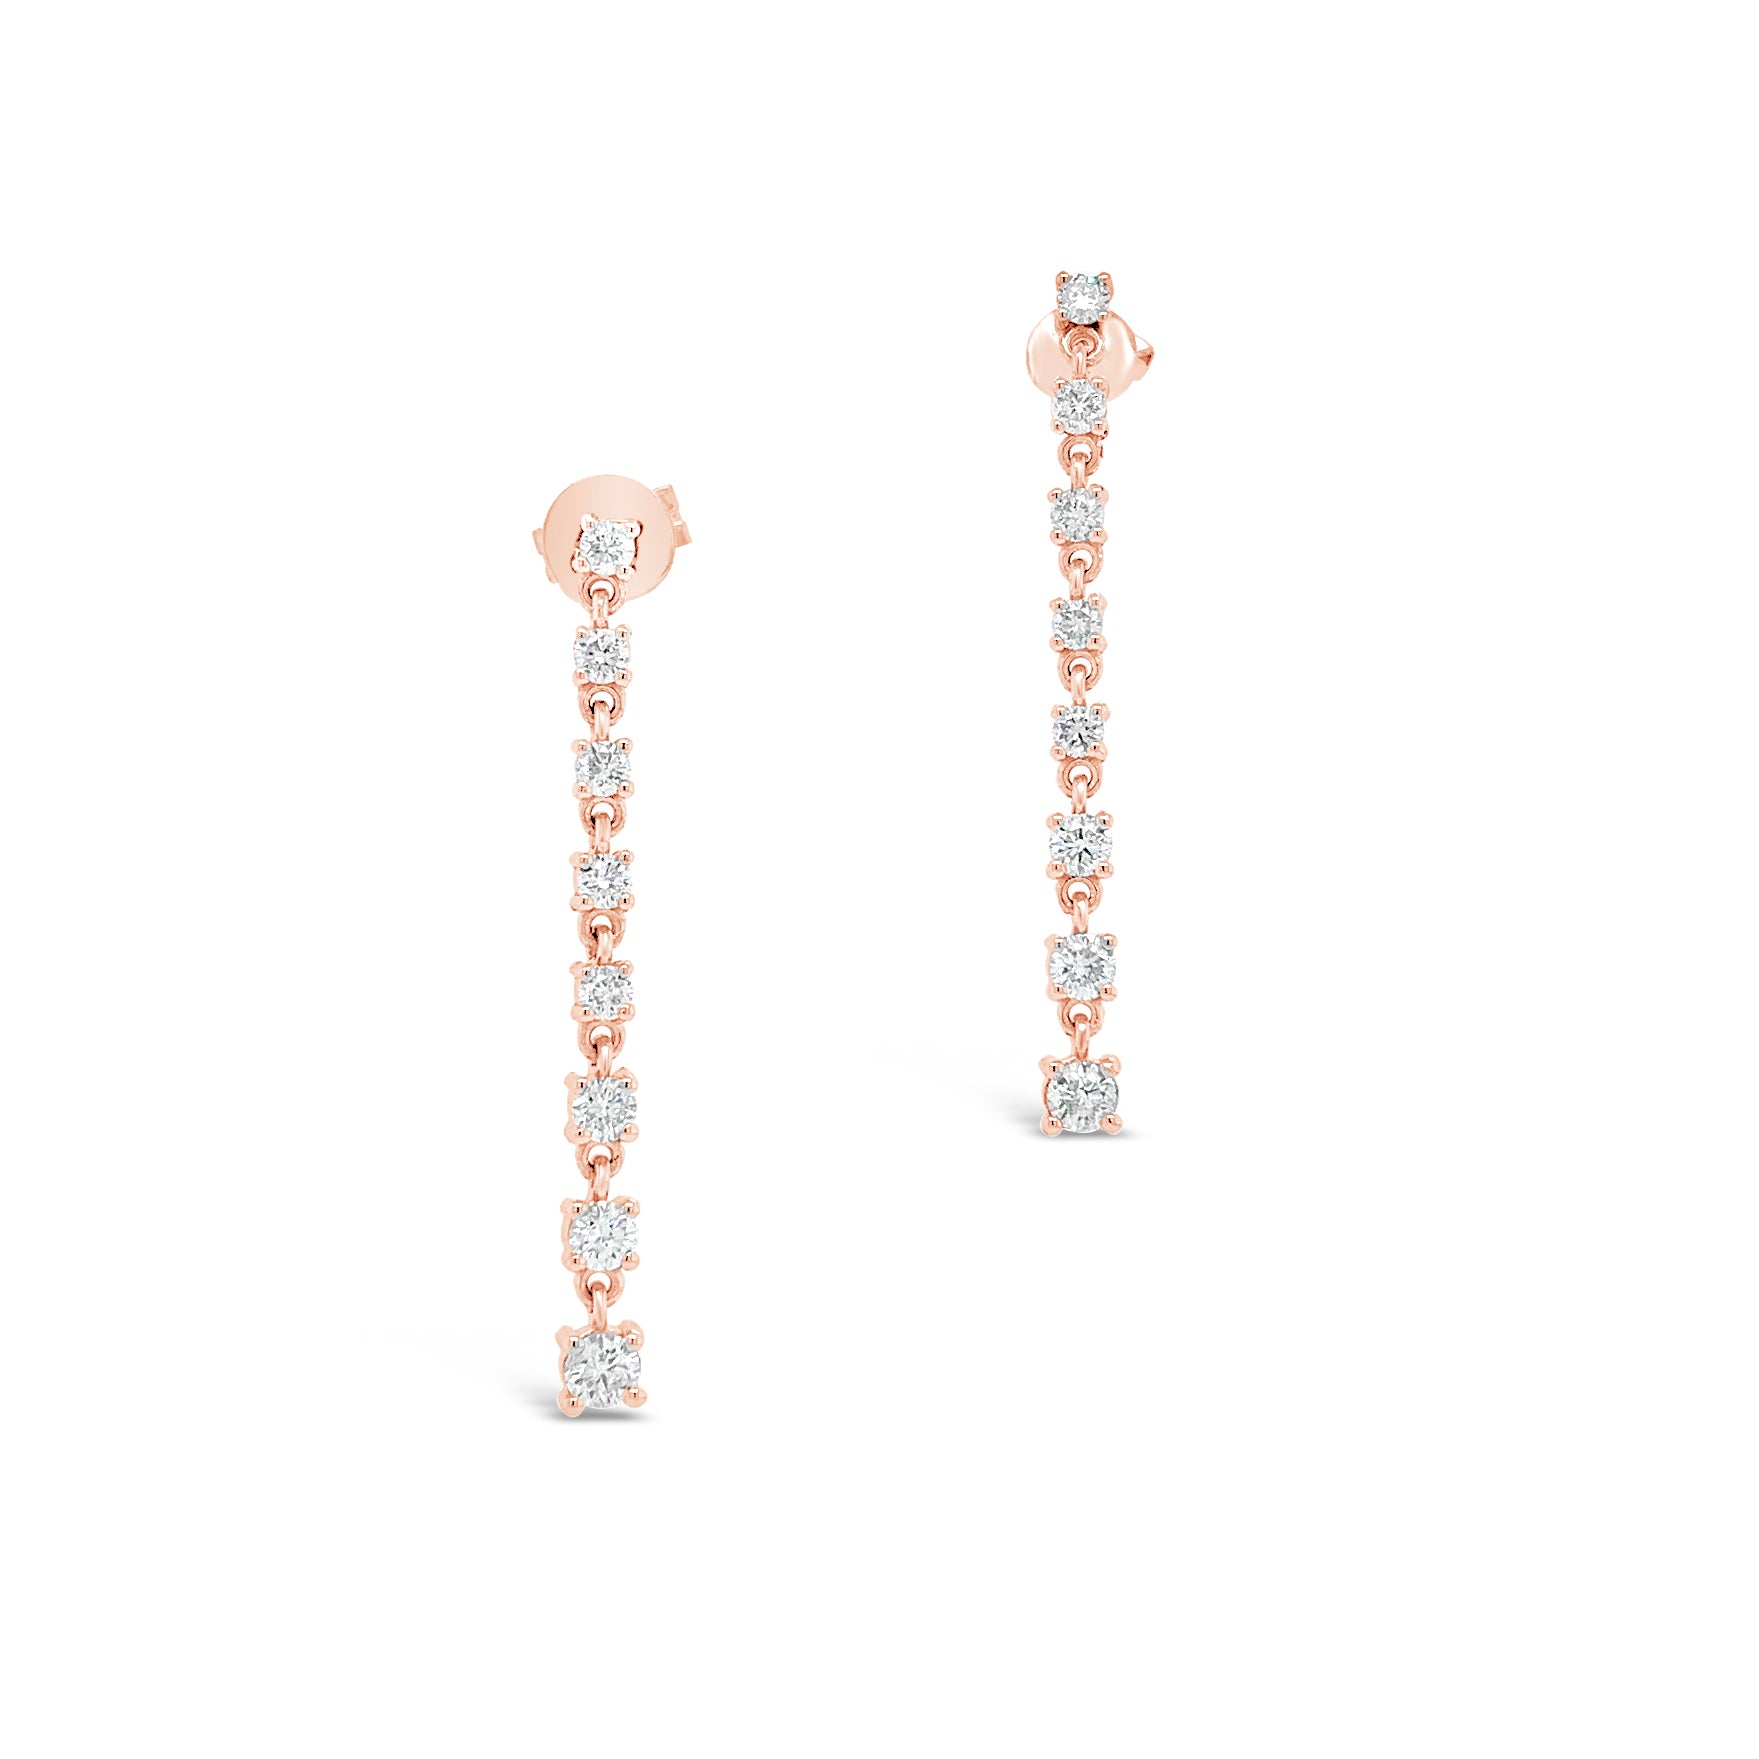 Diamond Linear Dangle Earrings -14K white gold weighing 1.96 grams -16 round diamonds totaling 0.78 carats